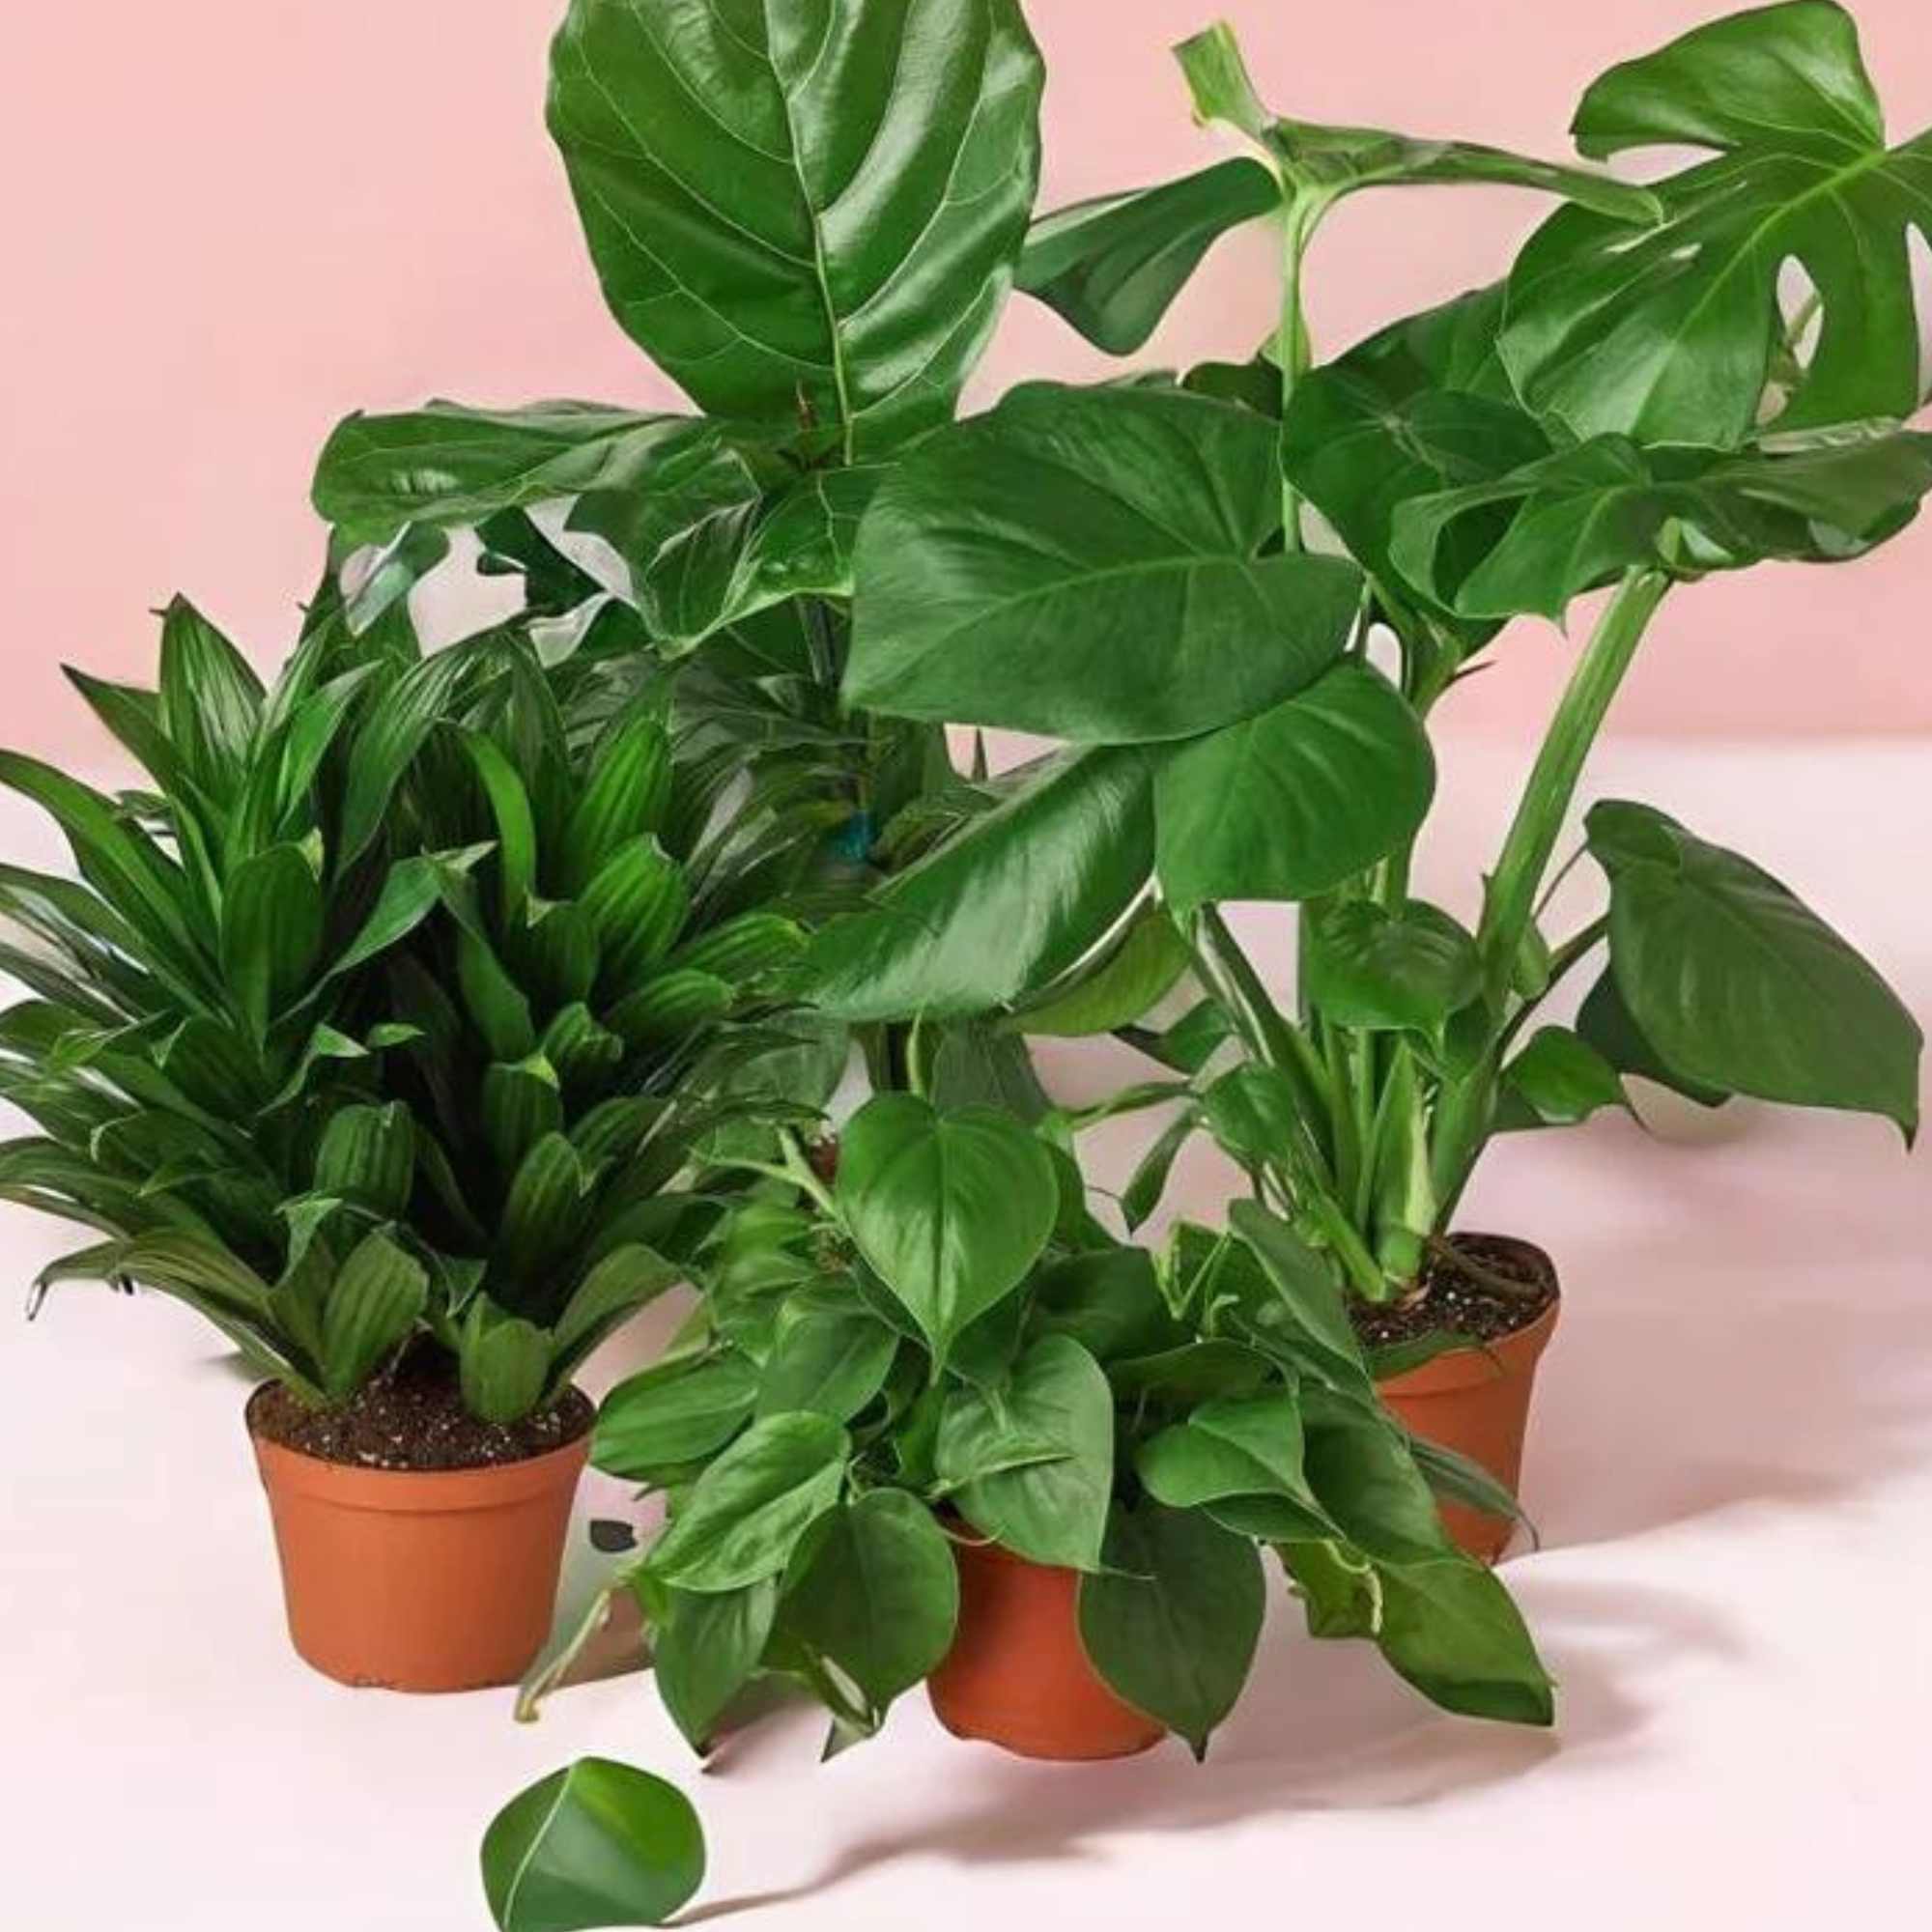 Enhancing Office Well-being: Crafting a Wellness Corner with Plants